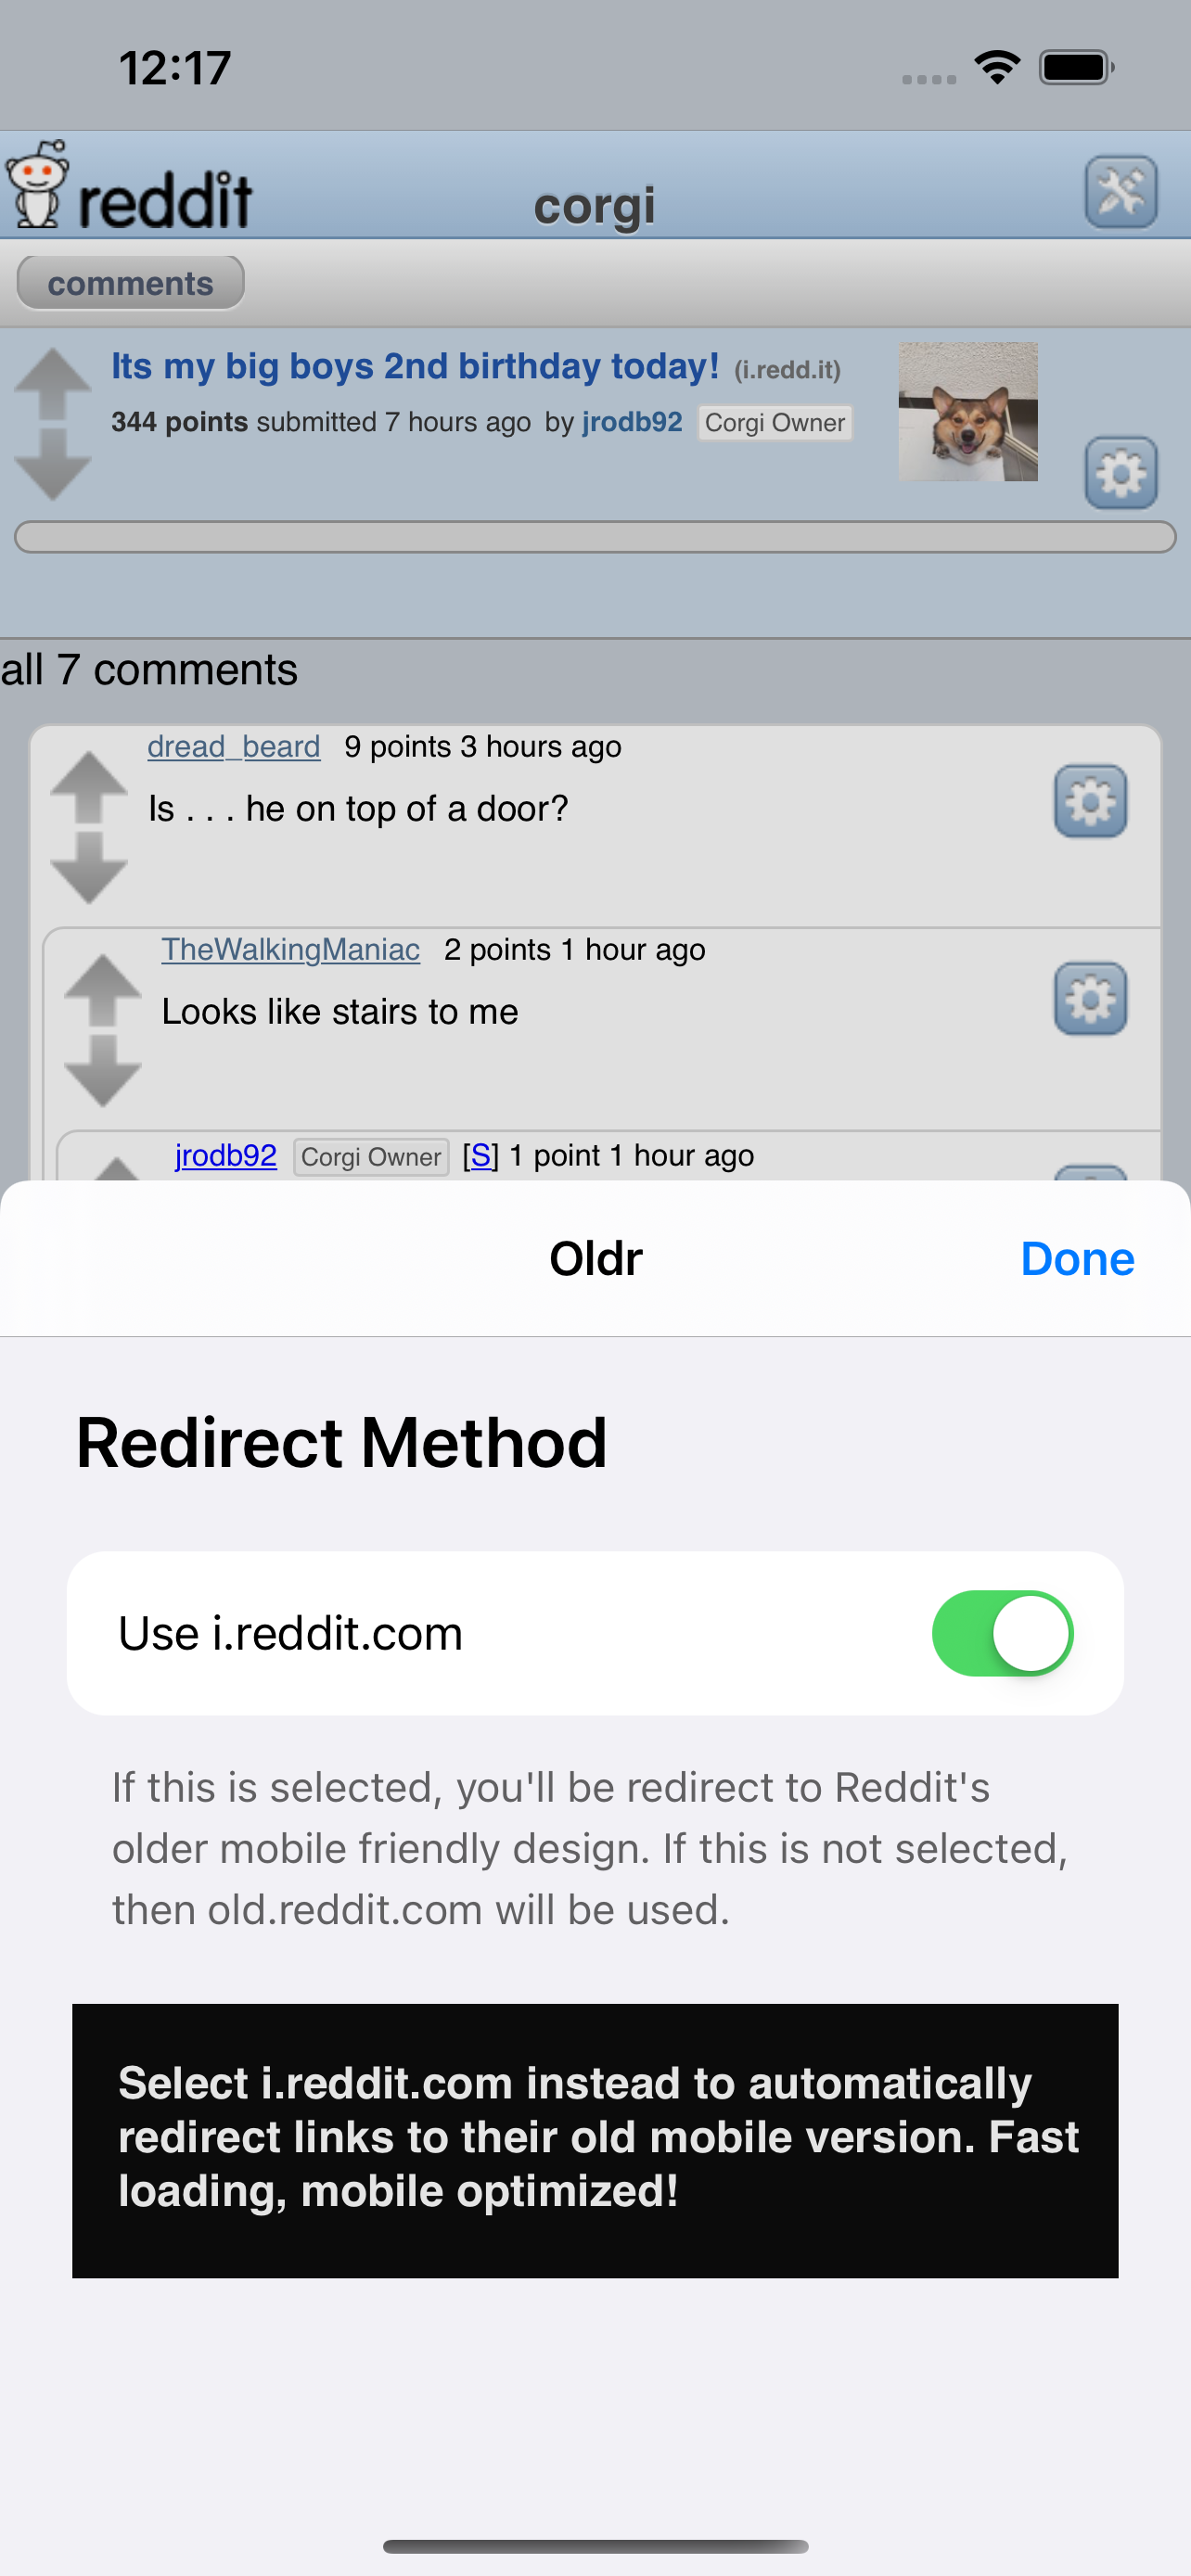 Automatically redirect to the old Reddit!